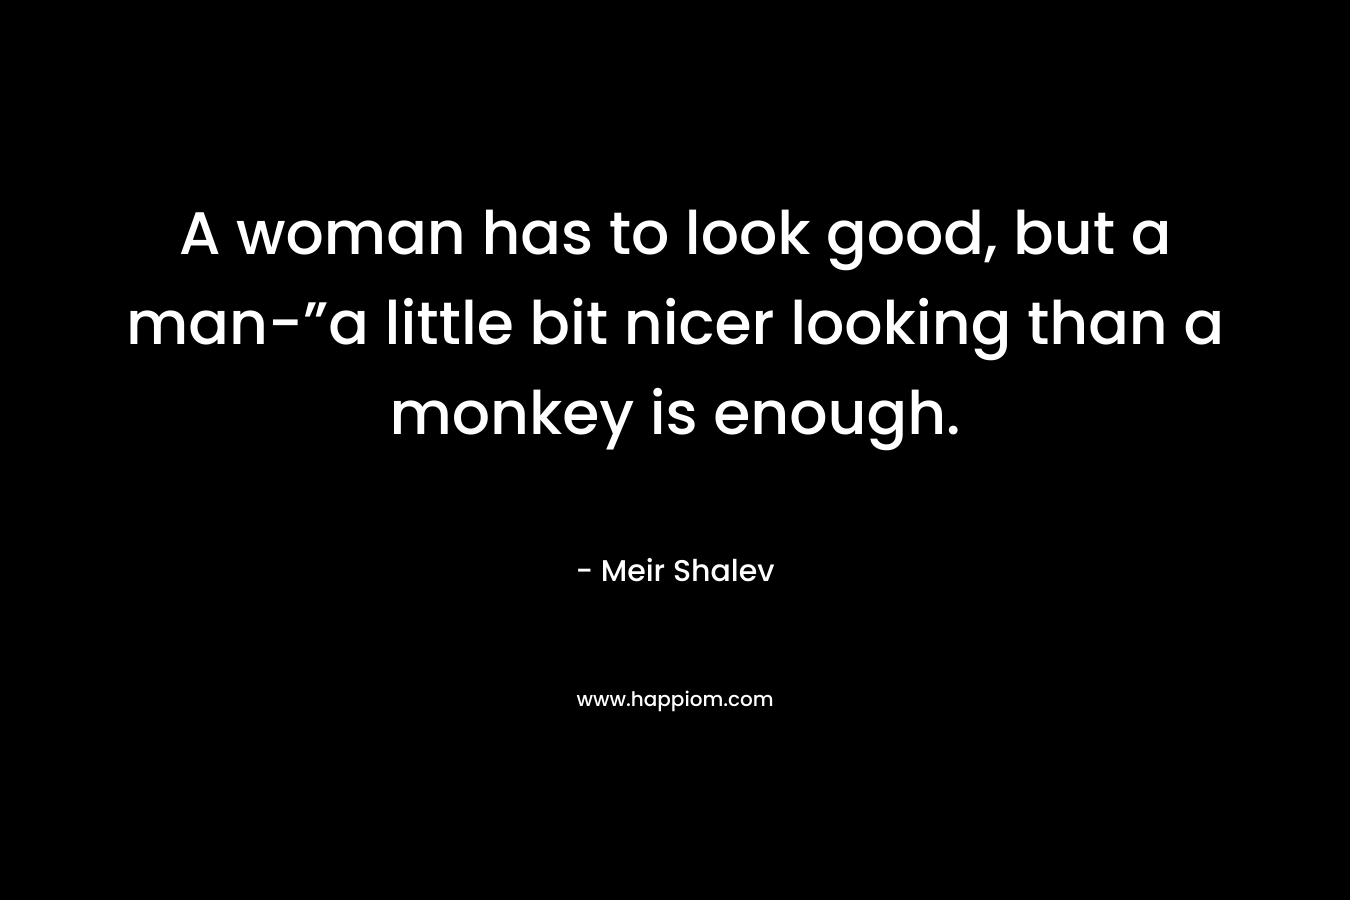 A woman has to look good, but a man-”a little bit nicer looking than a monkey is enough. – Meir Shalev